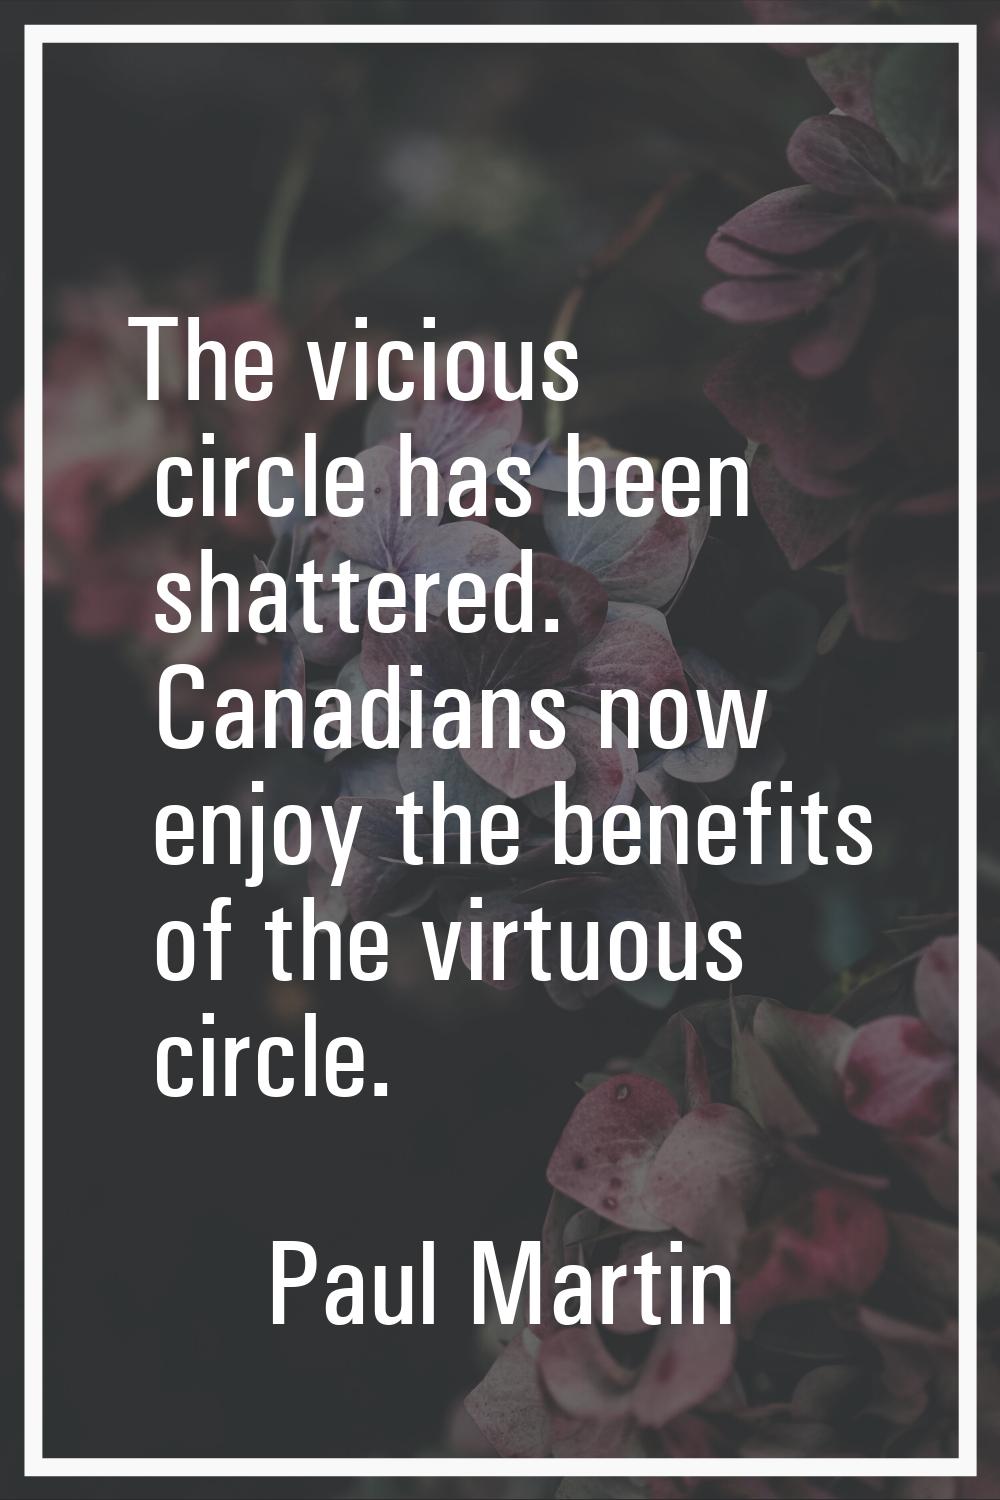 The vicious circle has been shattered. Canadians now enjoy the benefits of the virtuous circle.